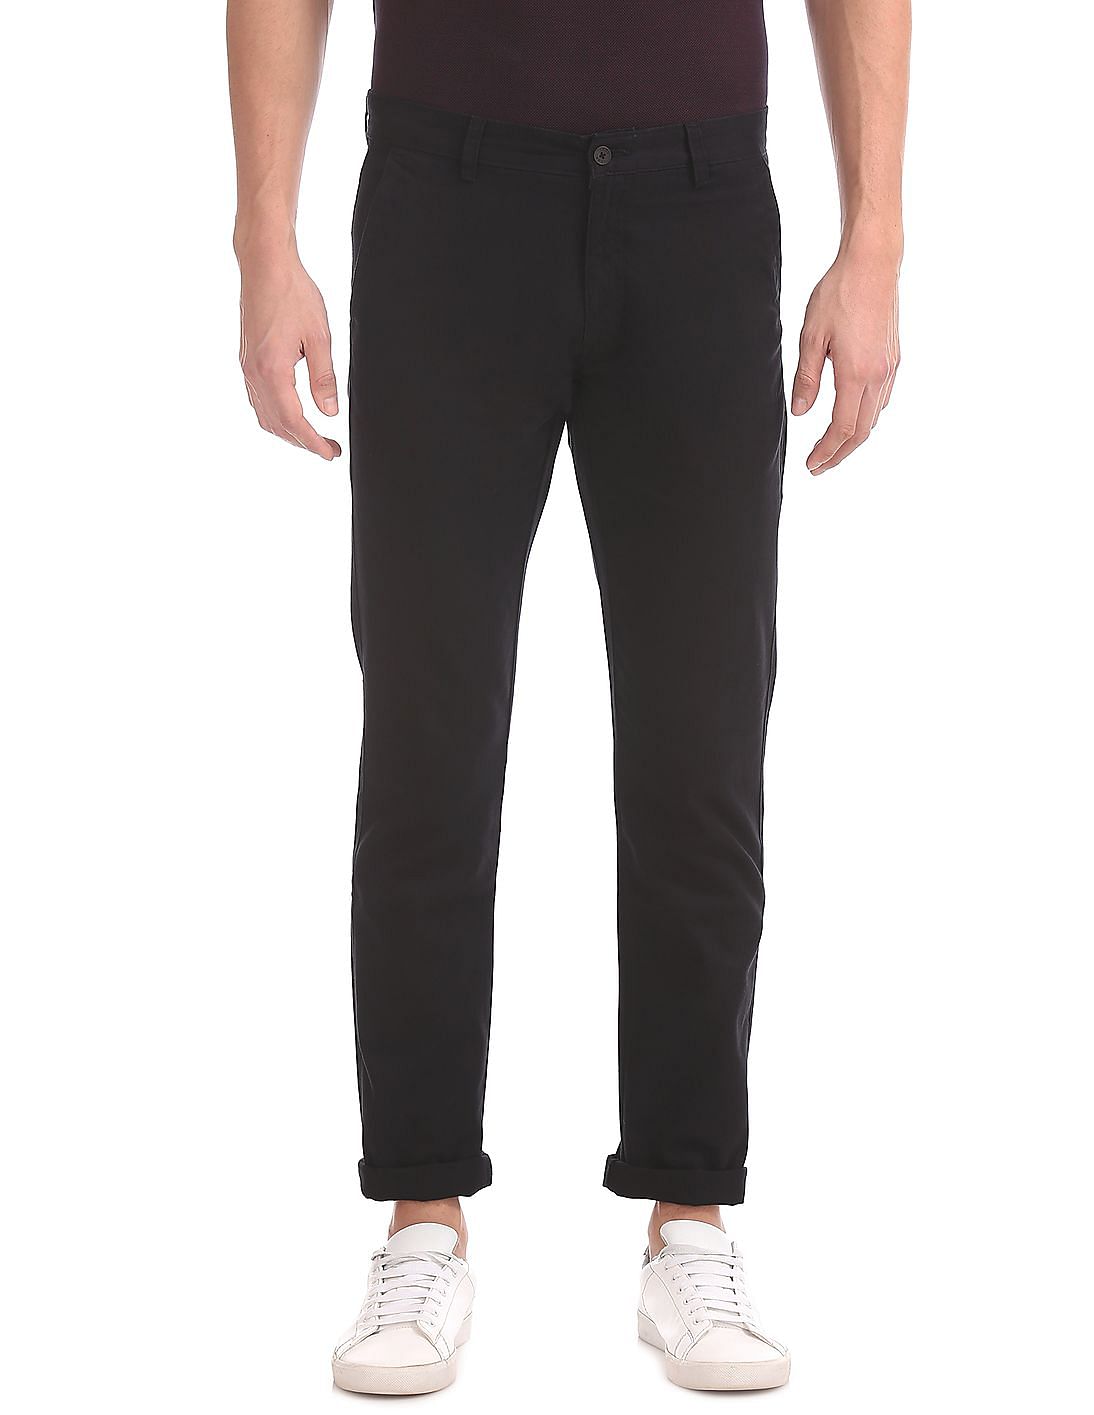 Exciting Offer | Men's Casual & Formal Trousers Under Rs.999 Only